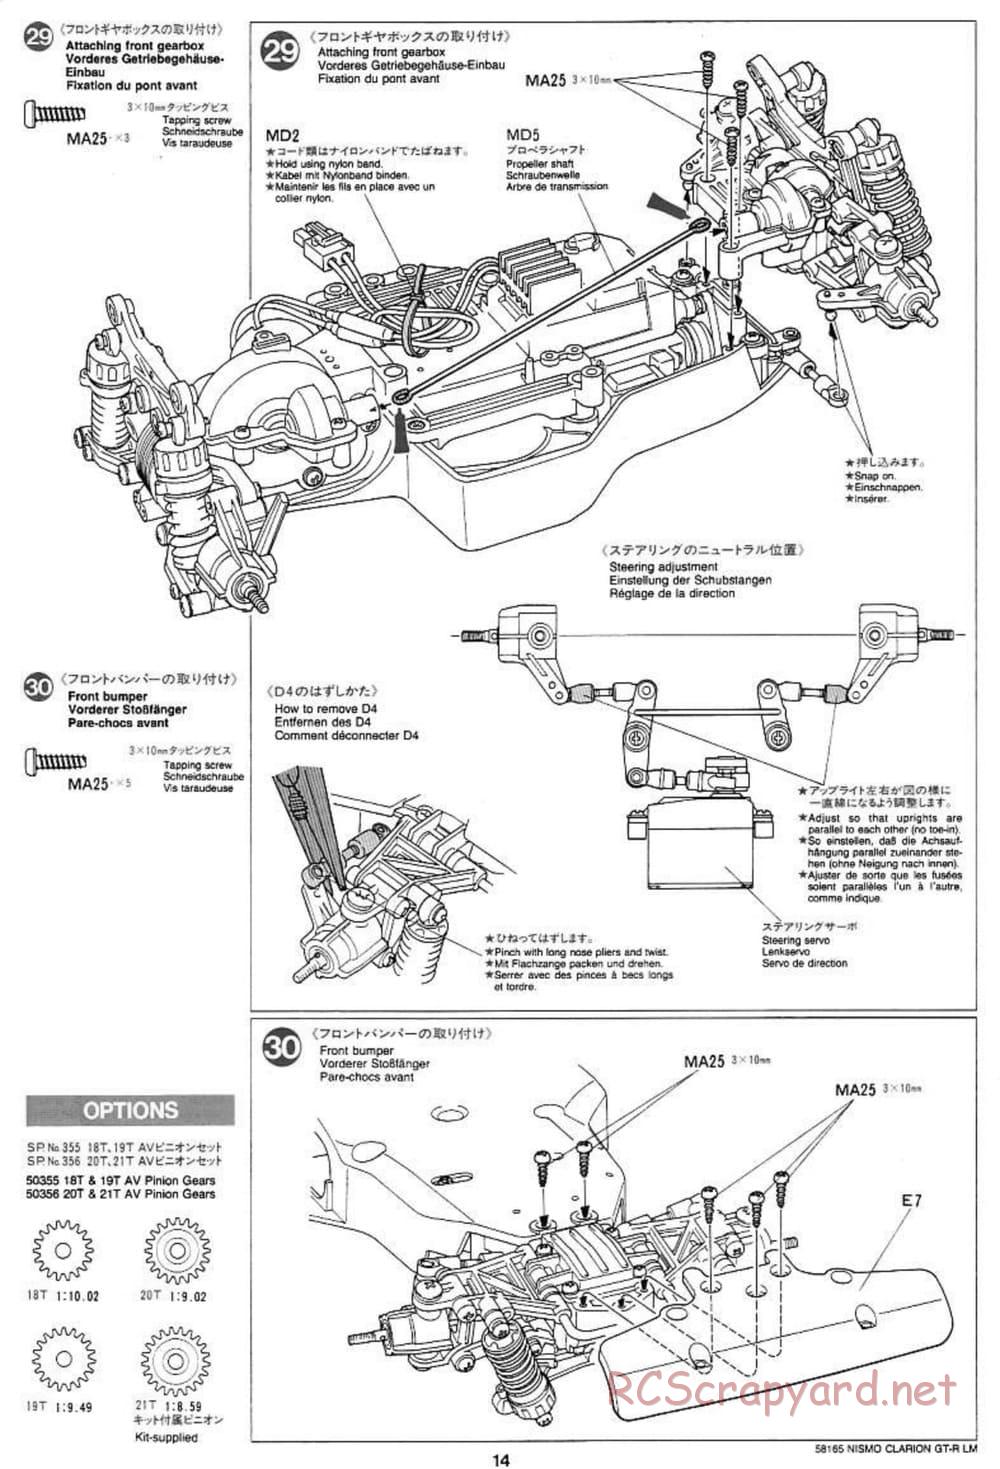 Tamiya - Nismo Clarion GT-R LM - TA-02W Chassis - Manual - Page 14